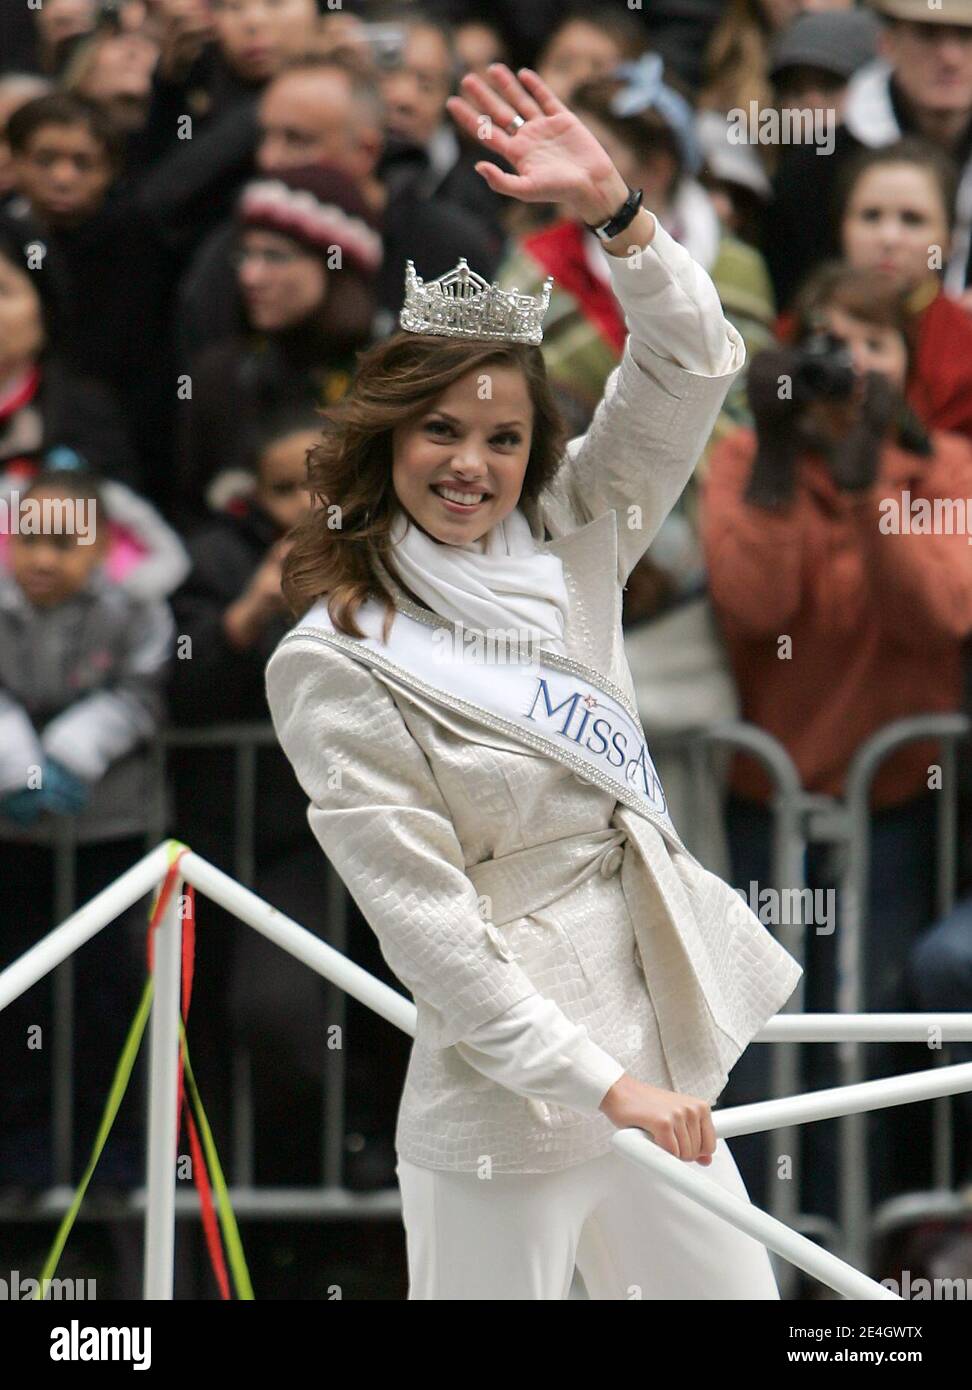 Miss America Katie Stam attends the 83rd Annual Macy's Thanksgiving Day Parade on November 26, 2009 in New York. Photo by Charles Guerin/ABACAPRESS.COM (Pictured : Katie Stam) Stock Photo